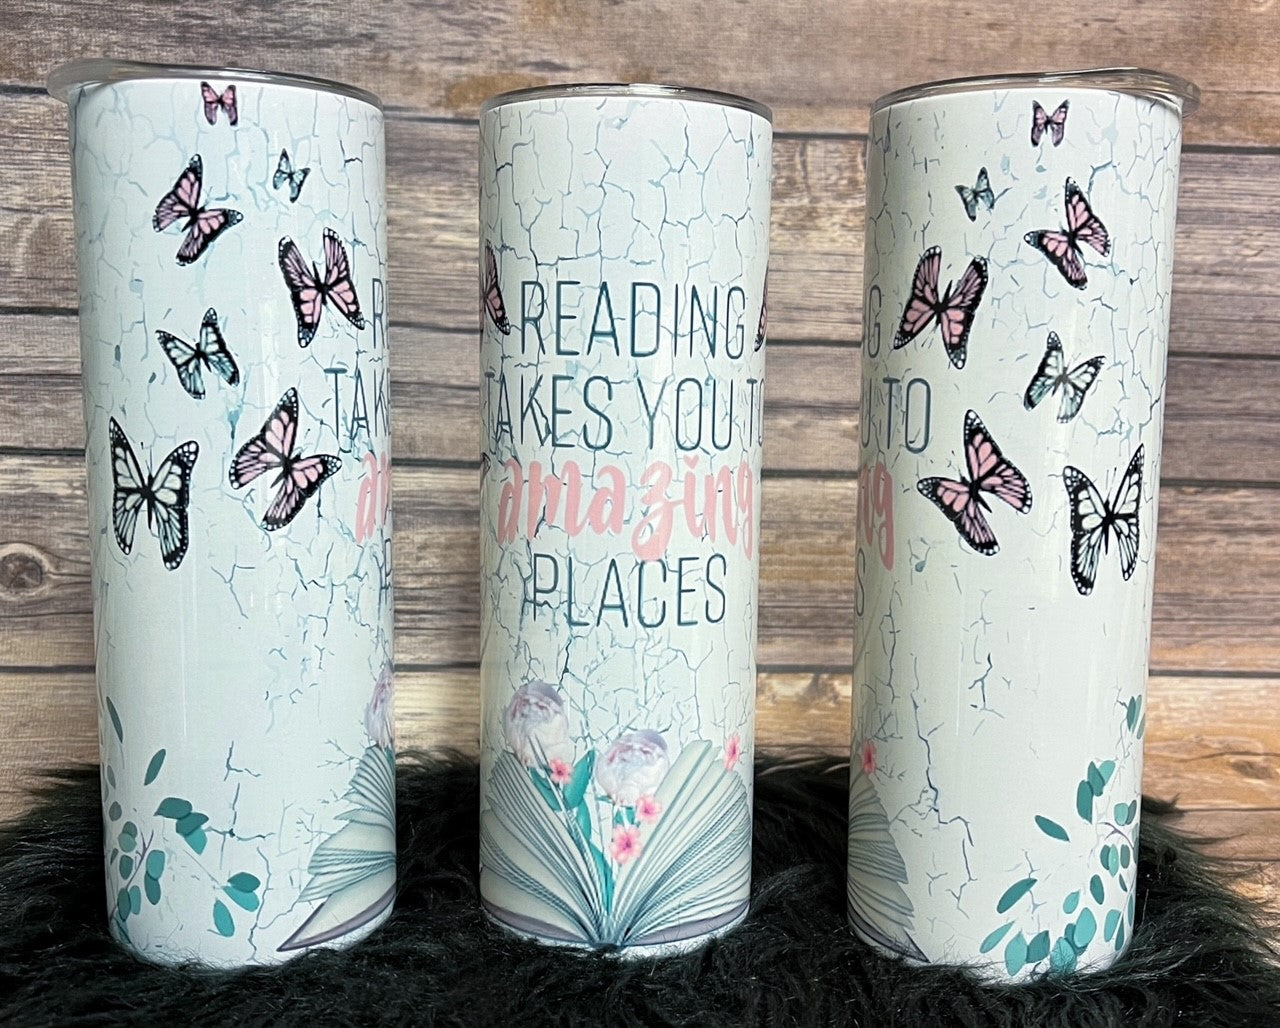 20oz Insulated Tumbler - Reading takes you to amazing places